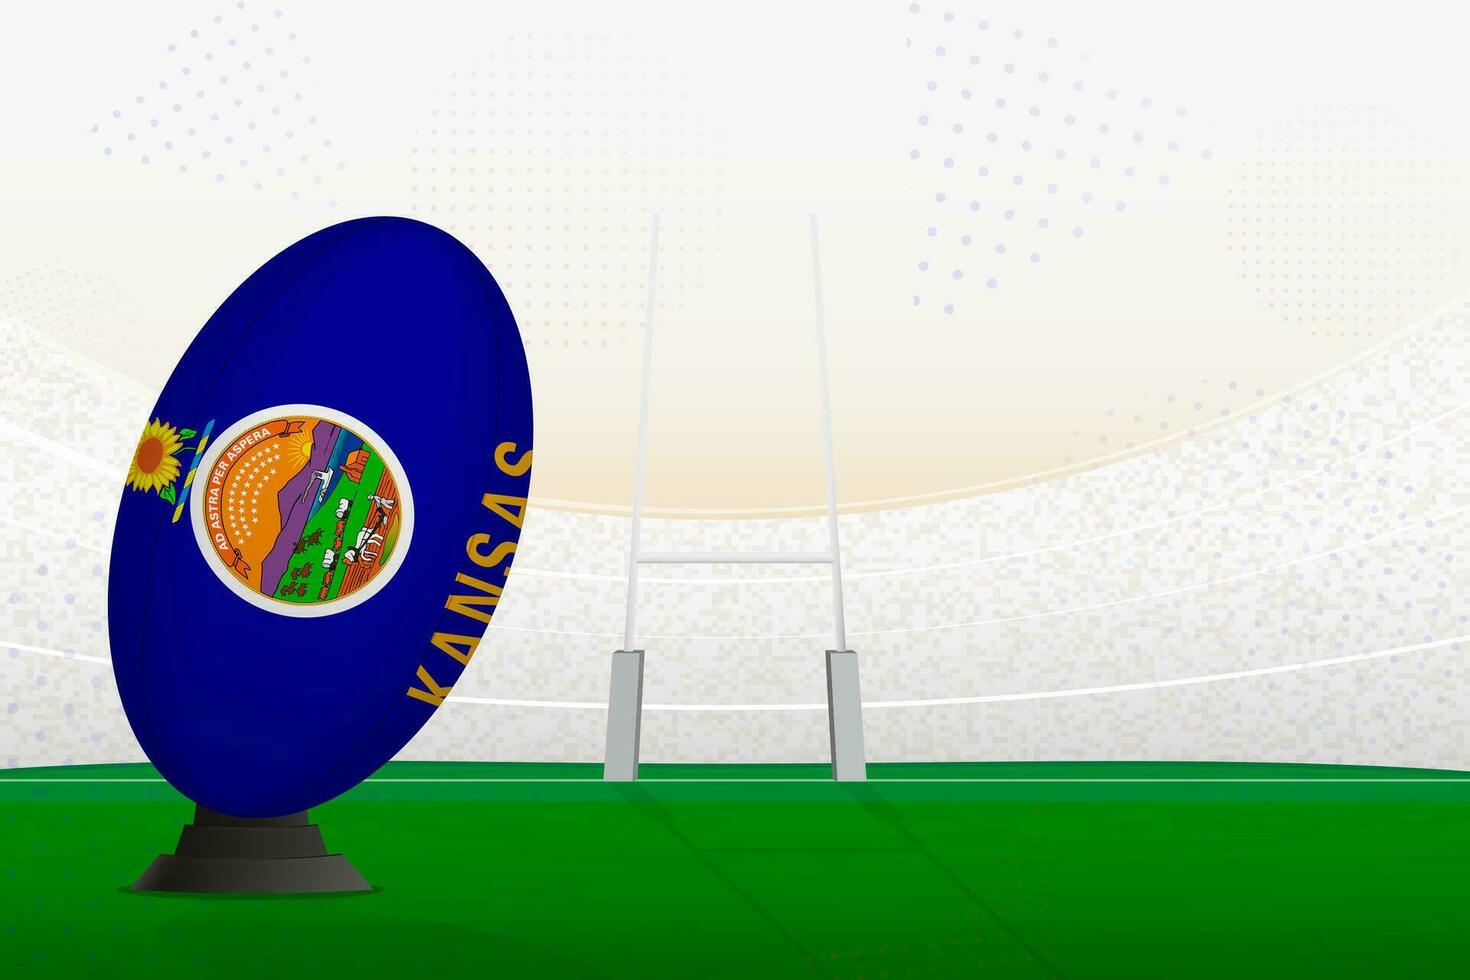 Kansas national team rugby ball on rugby stadium and goal posts, preparing for a penalty or free kick. vector